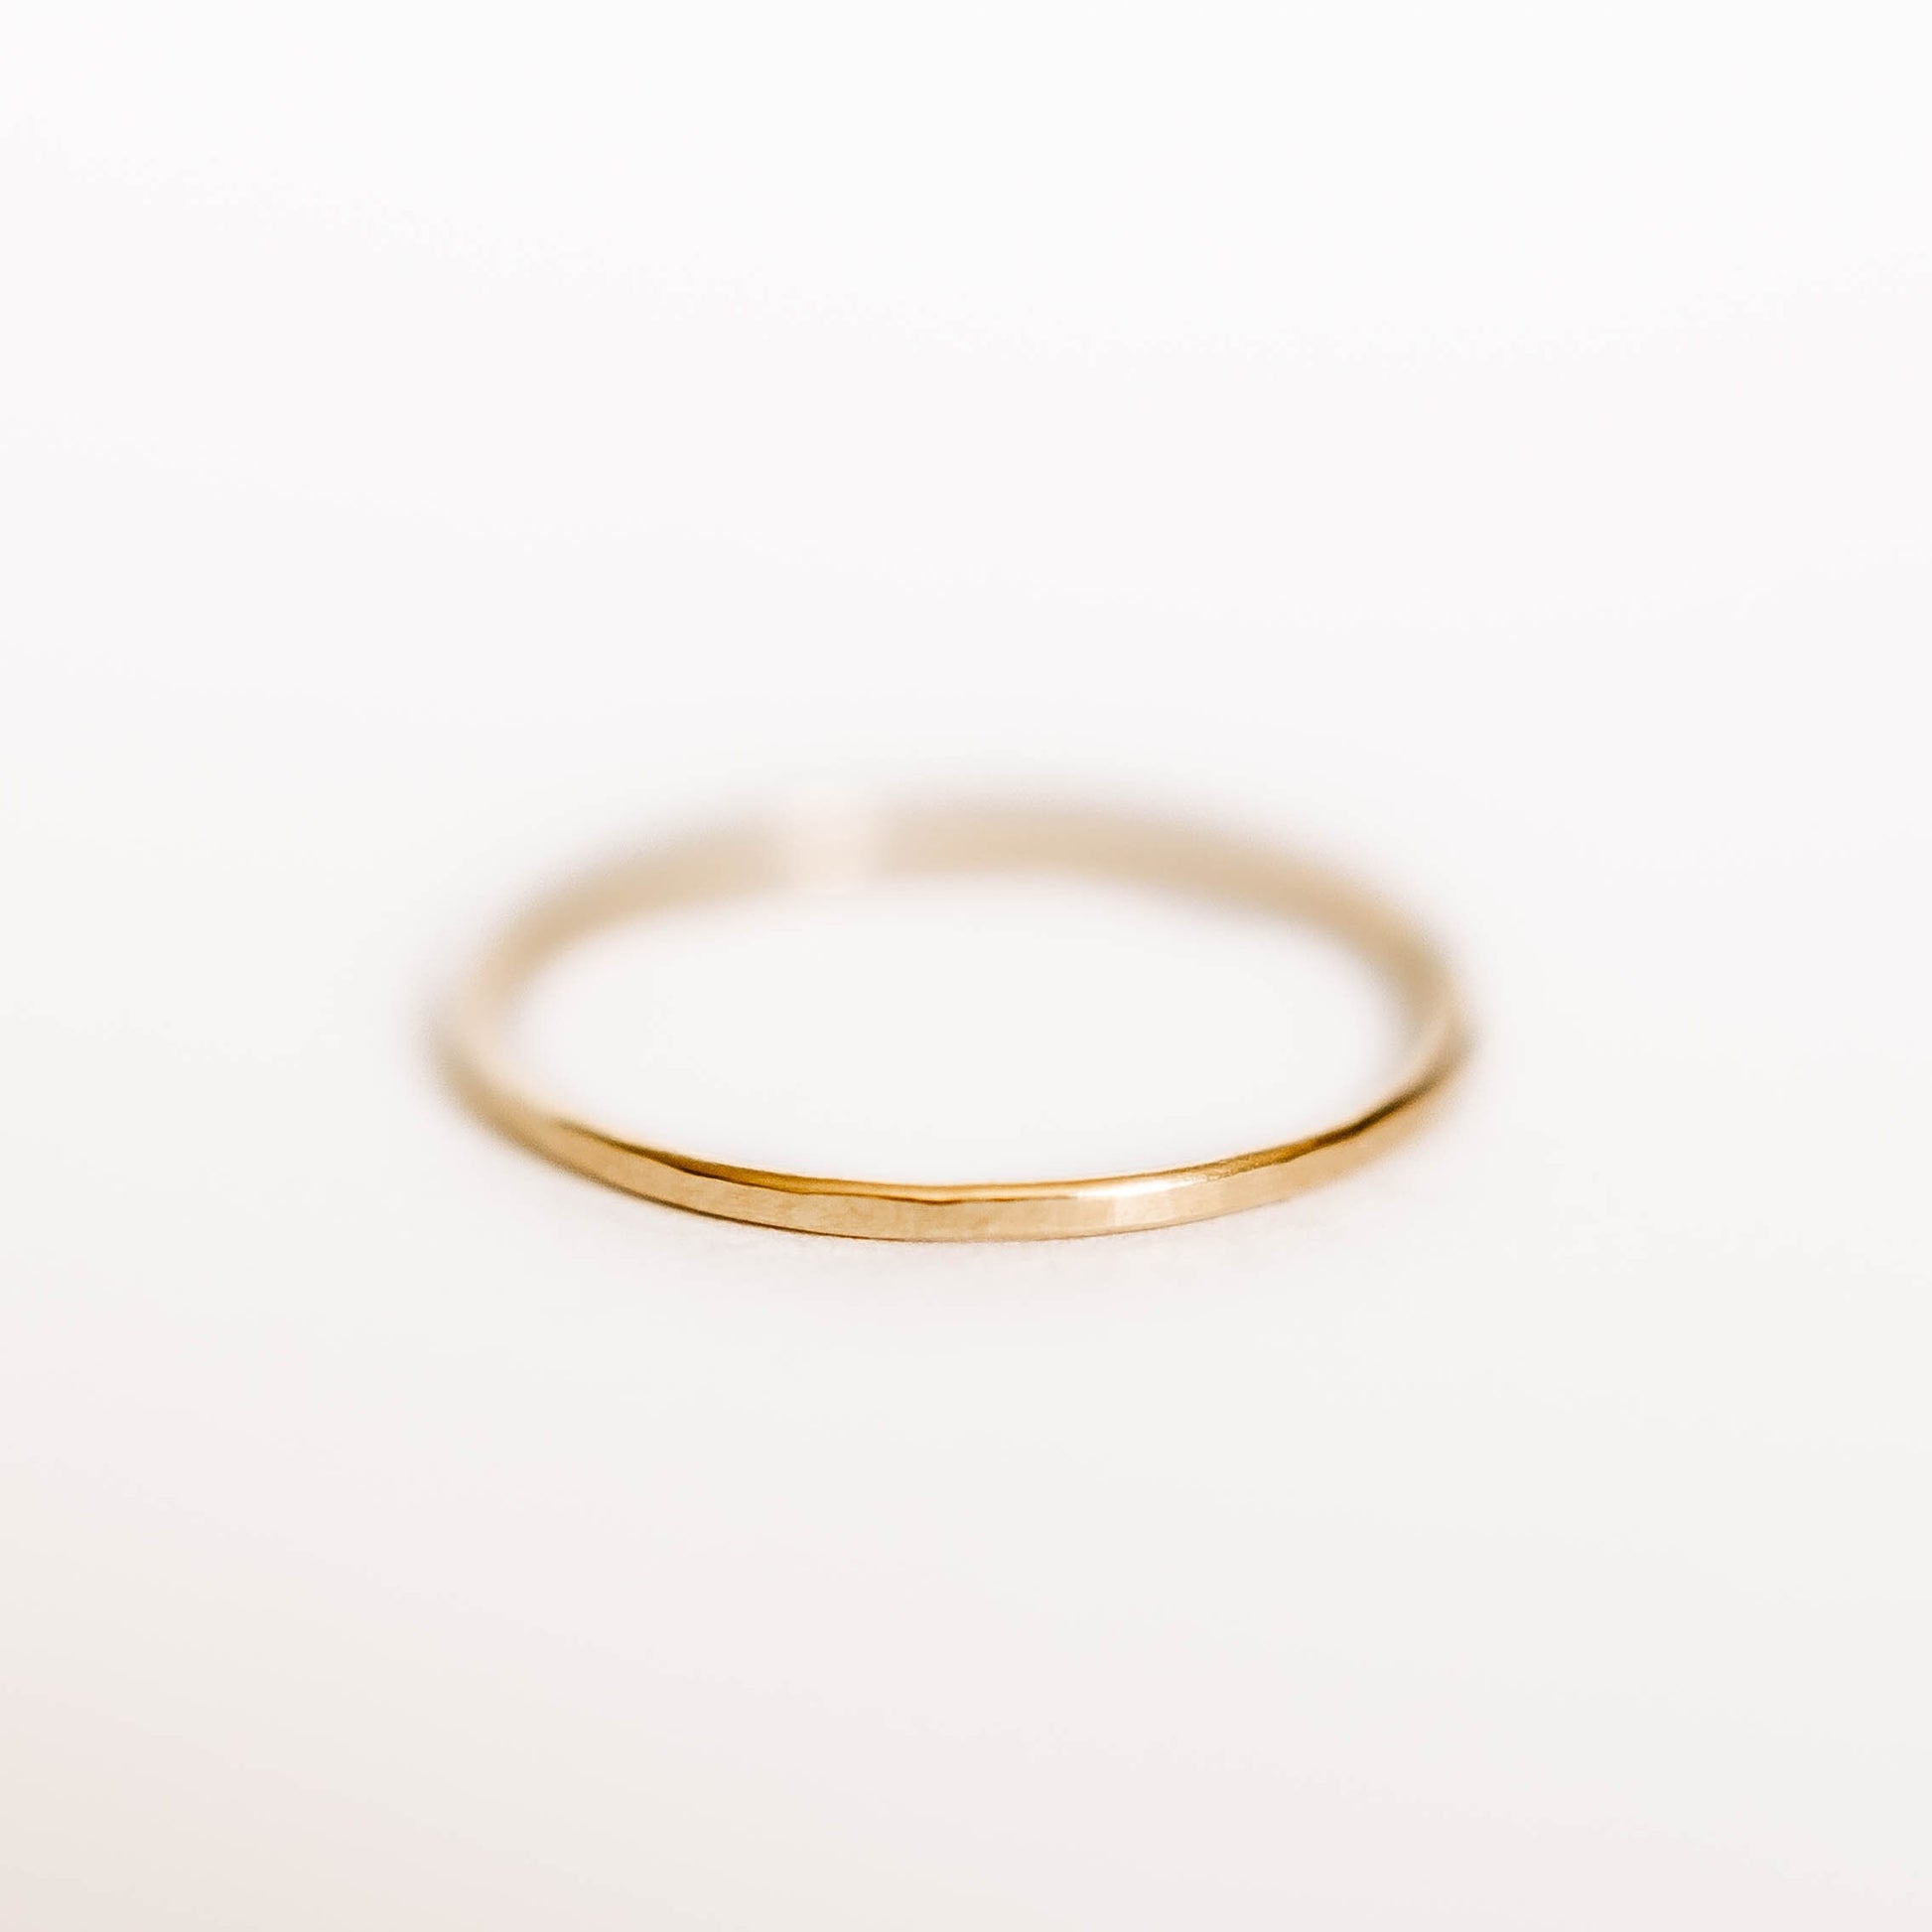 Womens Hammered Gold Wedding Band. This photo shows a dainty hammered 14k gold ring. (Horizontal with white background))